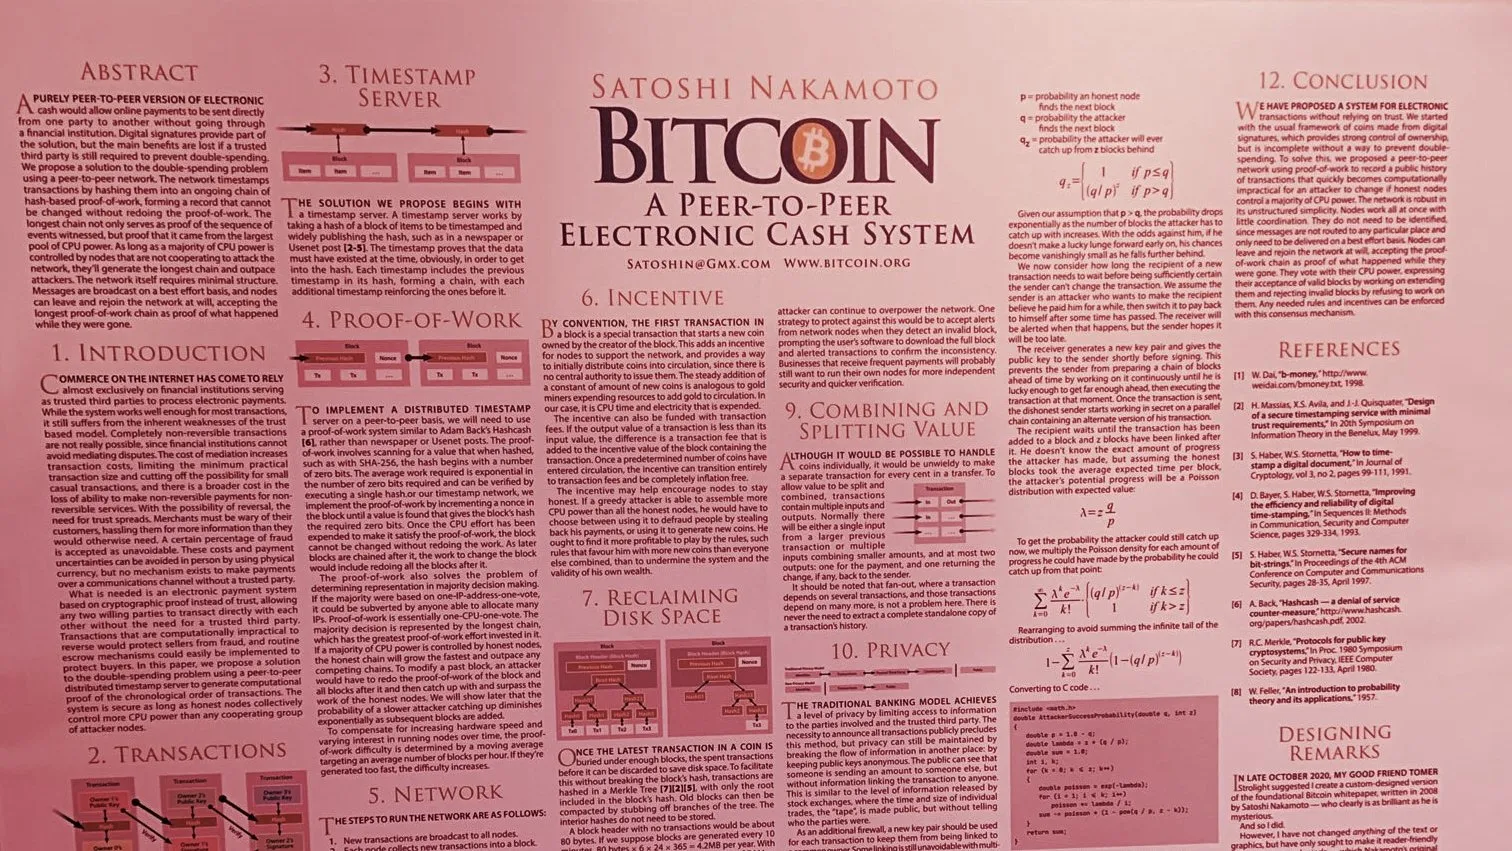 The Bitcoin whitepaper mounted on a wall. Image: Tomer Strolight.